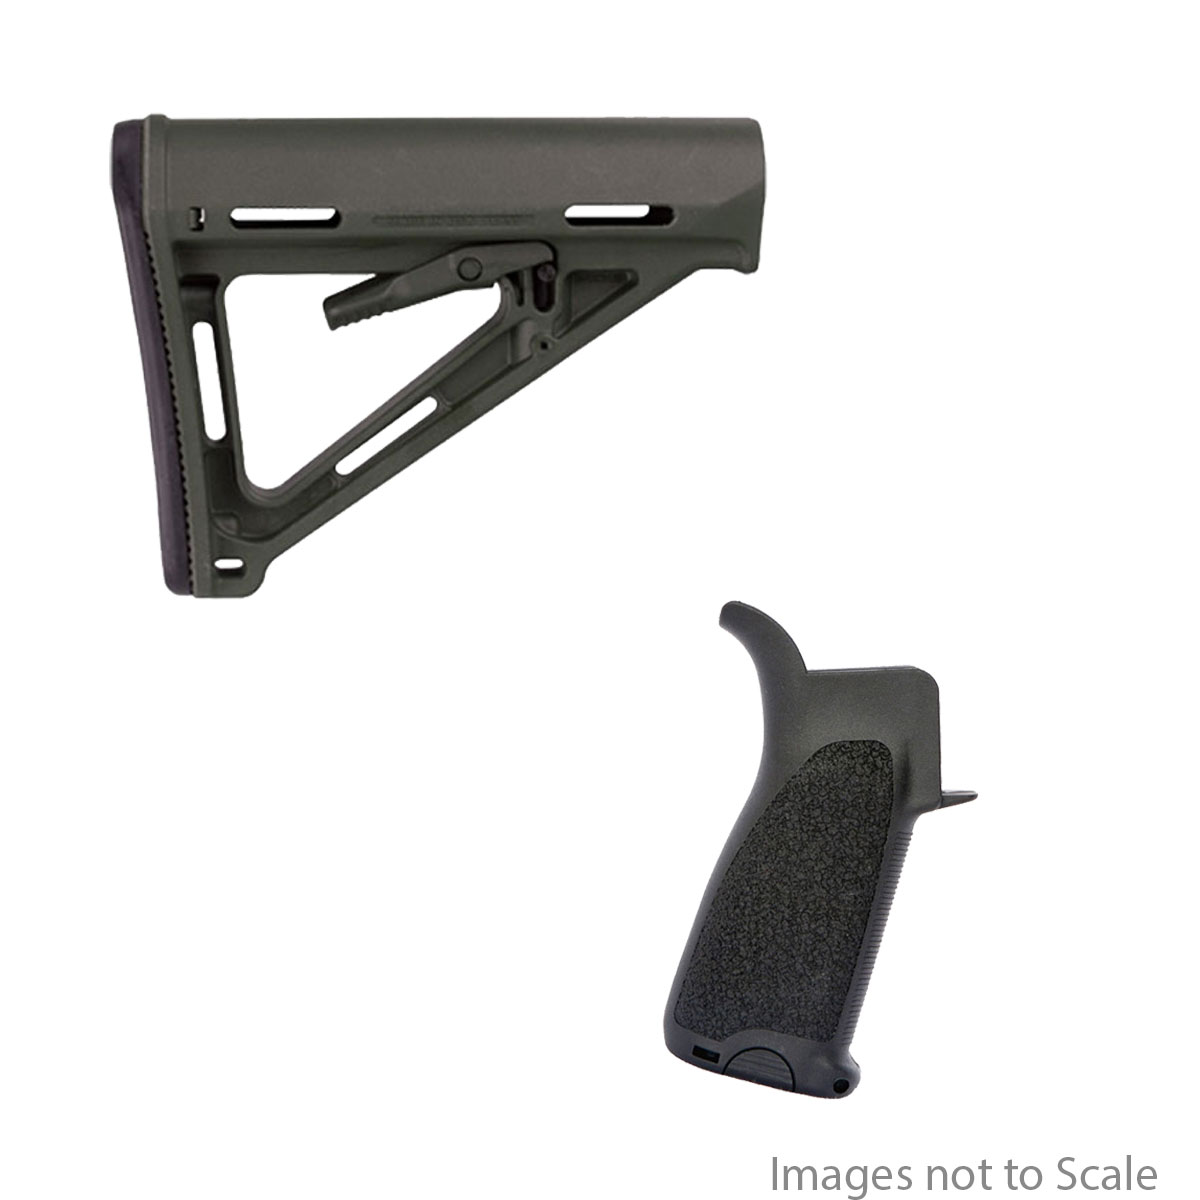 Furniture Kit: Magpul MOE Mil-Spec Collapsible AR-15 Carbine Synthetic Buttstock + BCM Gunfighter Black Mod 3 Grip